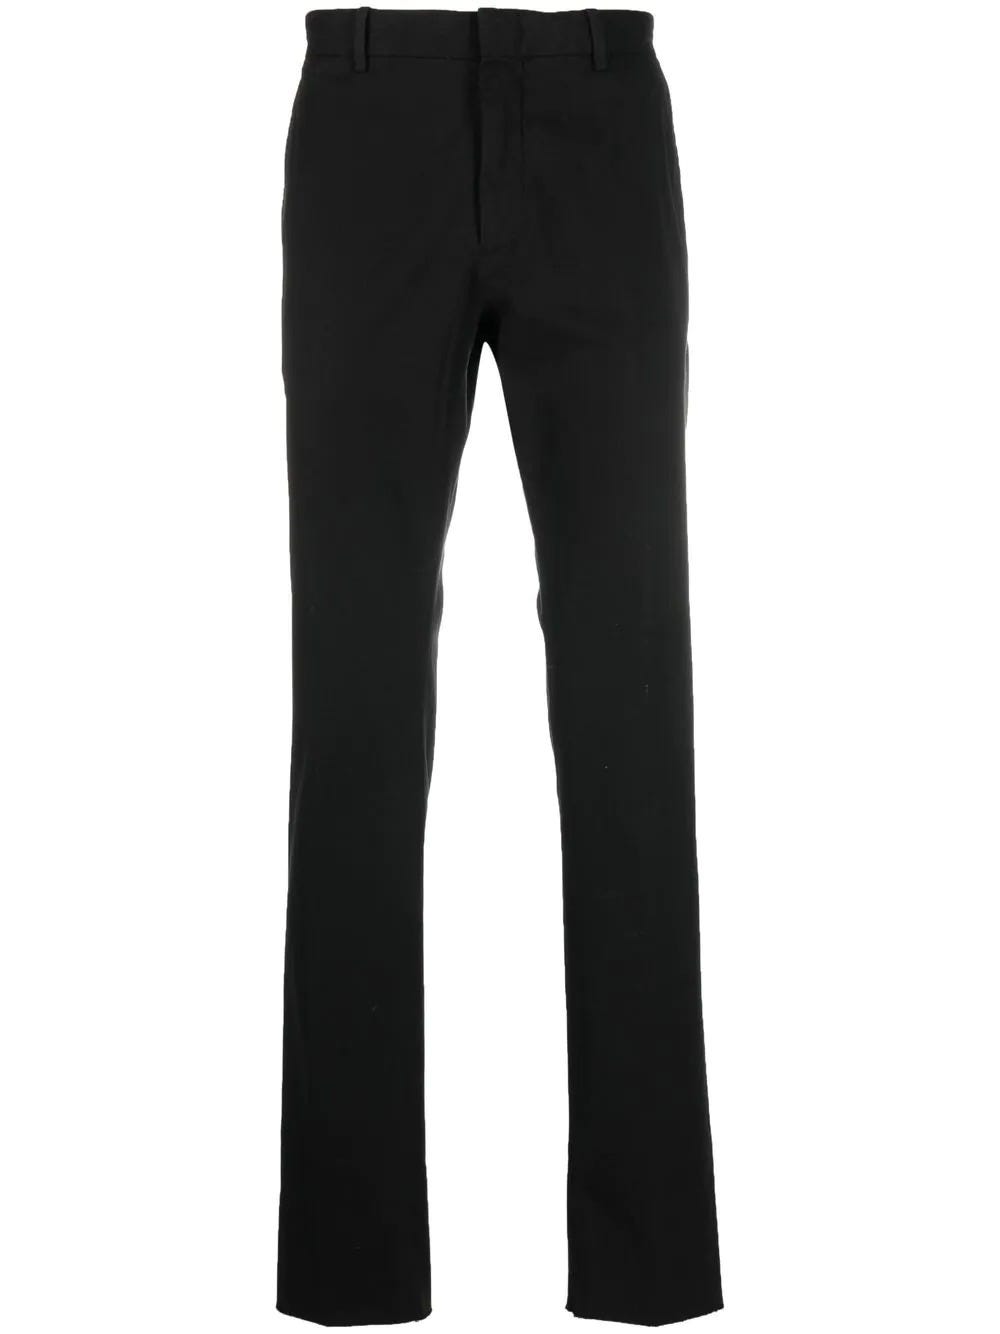 ZEGNA BLACK SLIM-FIT TAILORED TROUSERS